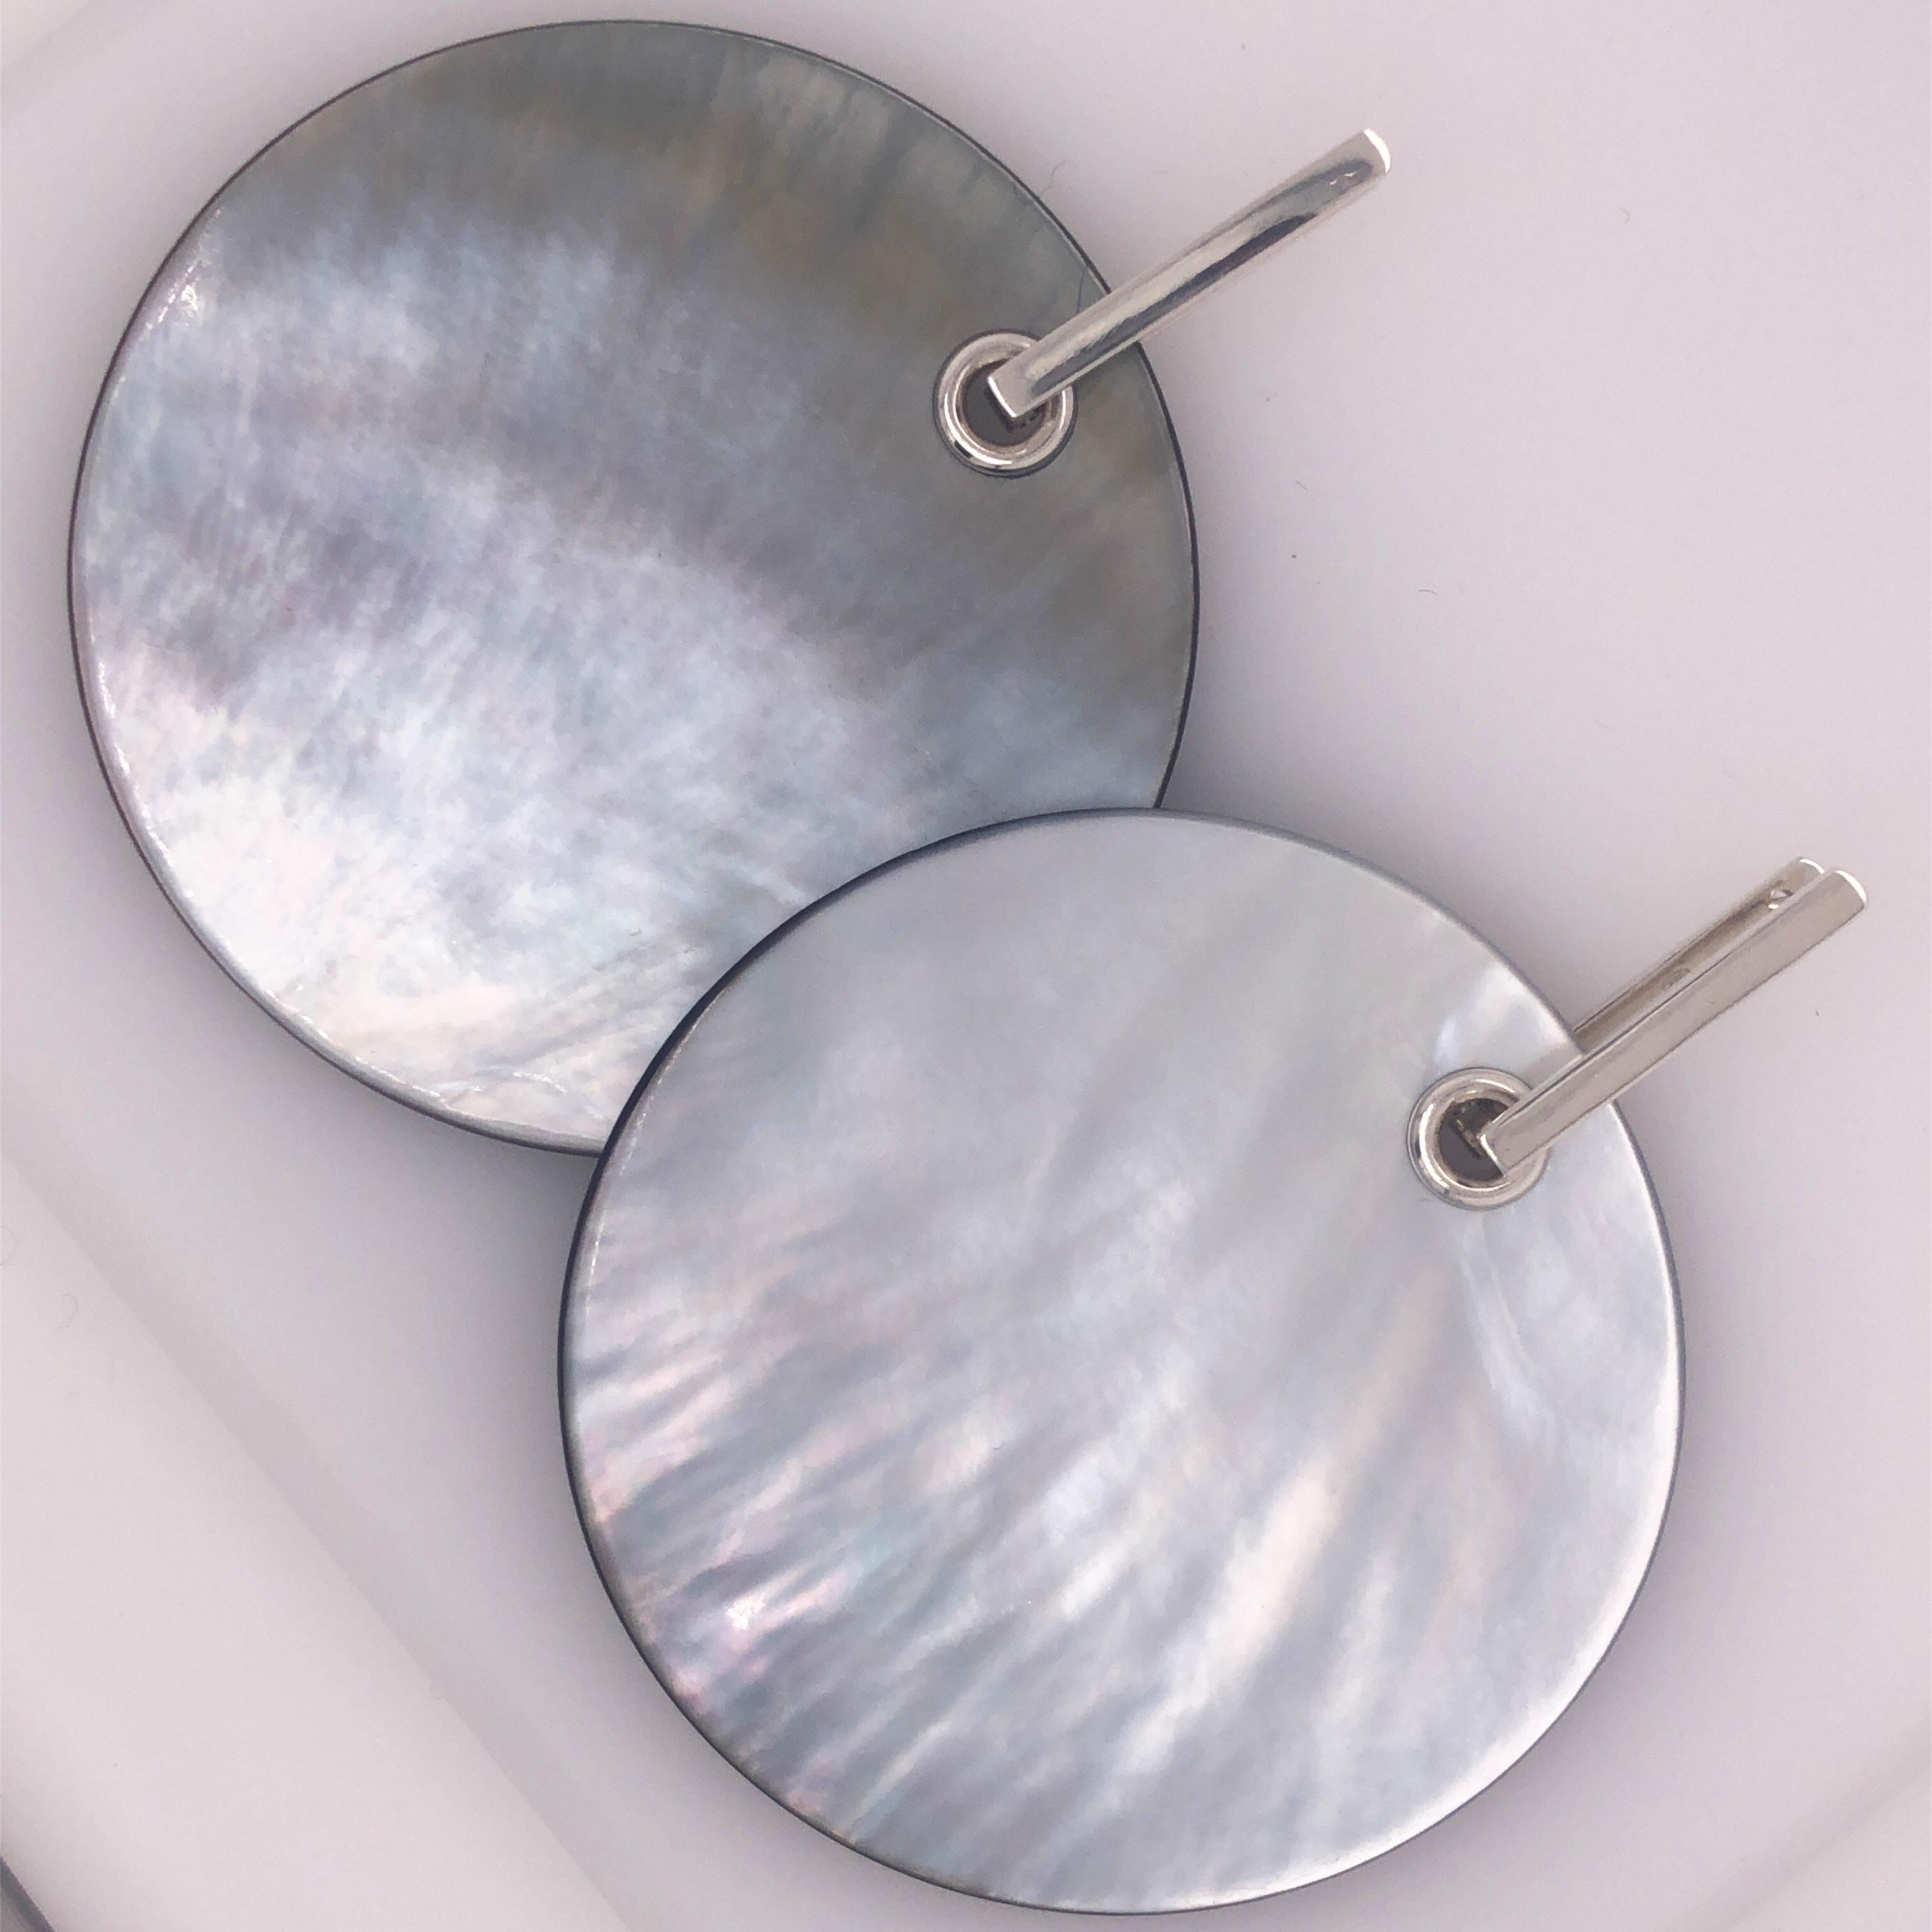 Unique, absolutely Chic, Removable Pale Light Grey Mother-of-pearl Hand Enameled Disk (2.5inches, 6.5cm diameter) in a contemporary, minimalist Sterling Silver Setting.
The disks may be worn both sides, on the reverse with a warm golden brown